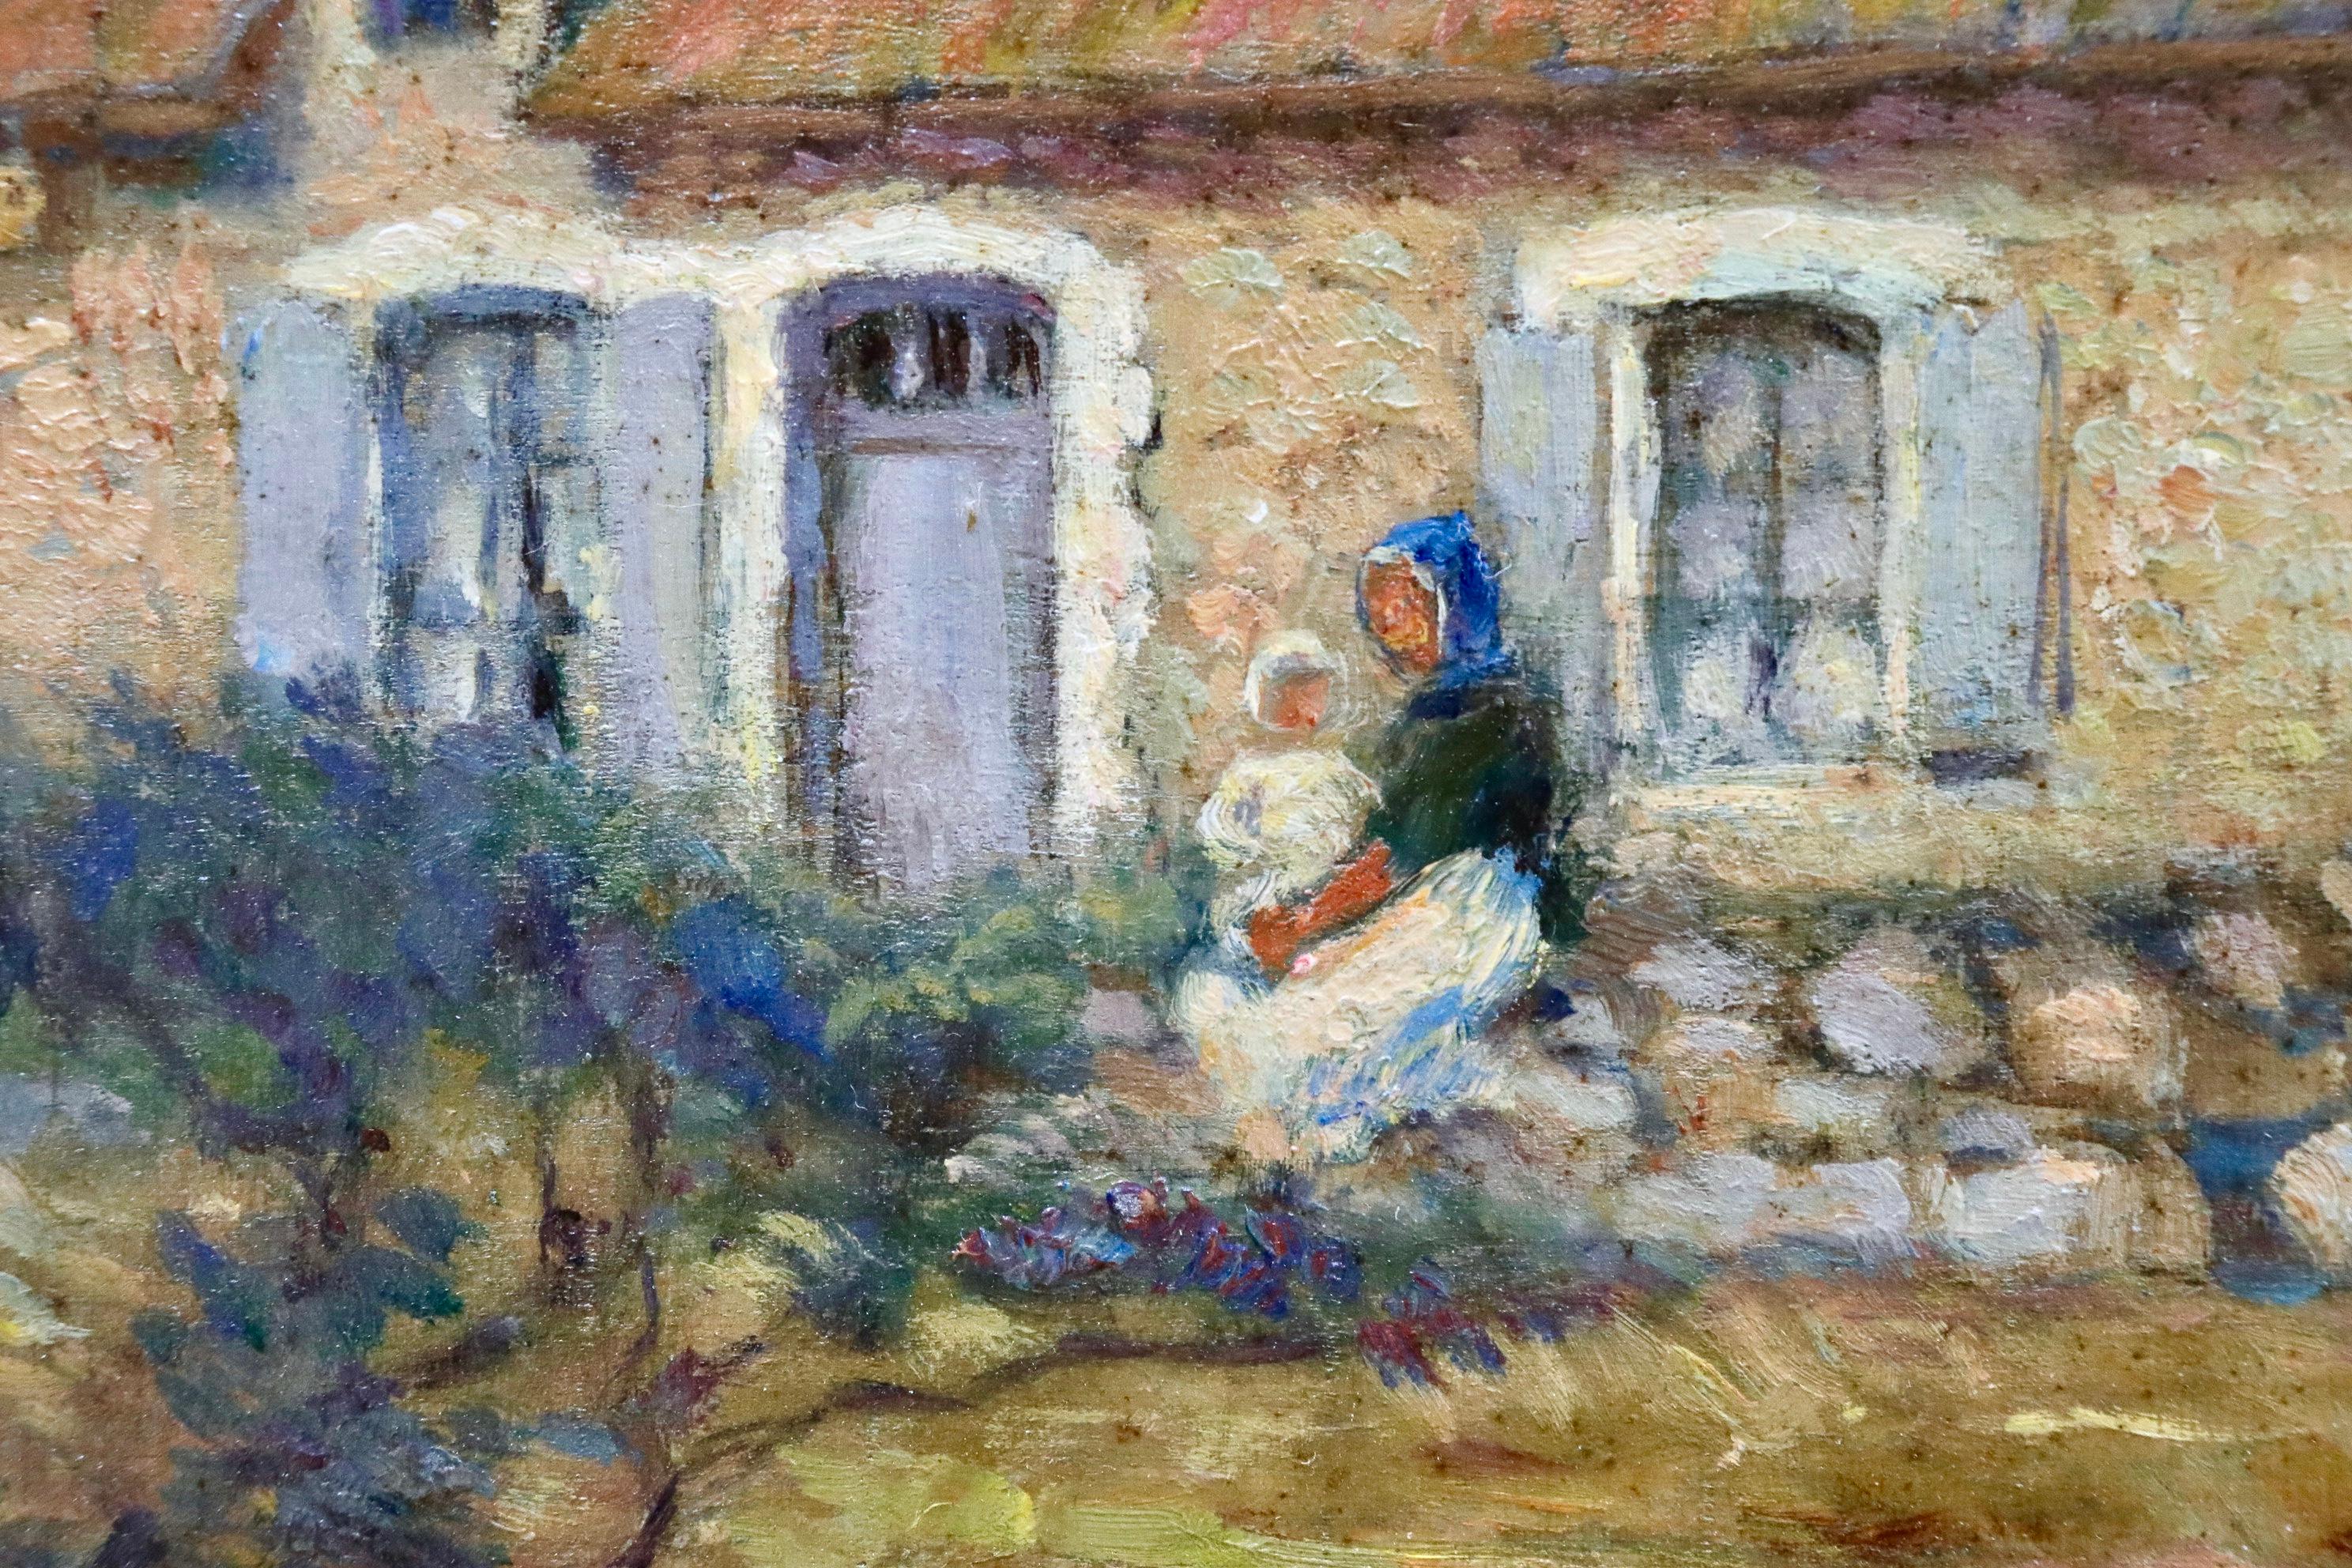 Mother & Child by a Cottage - 19th Century Oil, Figures in Landscape by M Duhem - Impressionist Painting by Marie Duhem